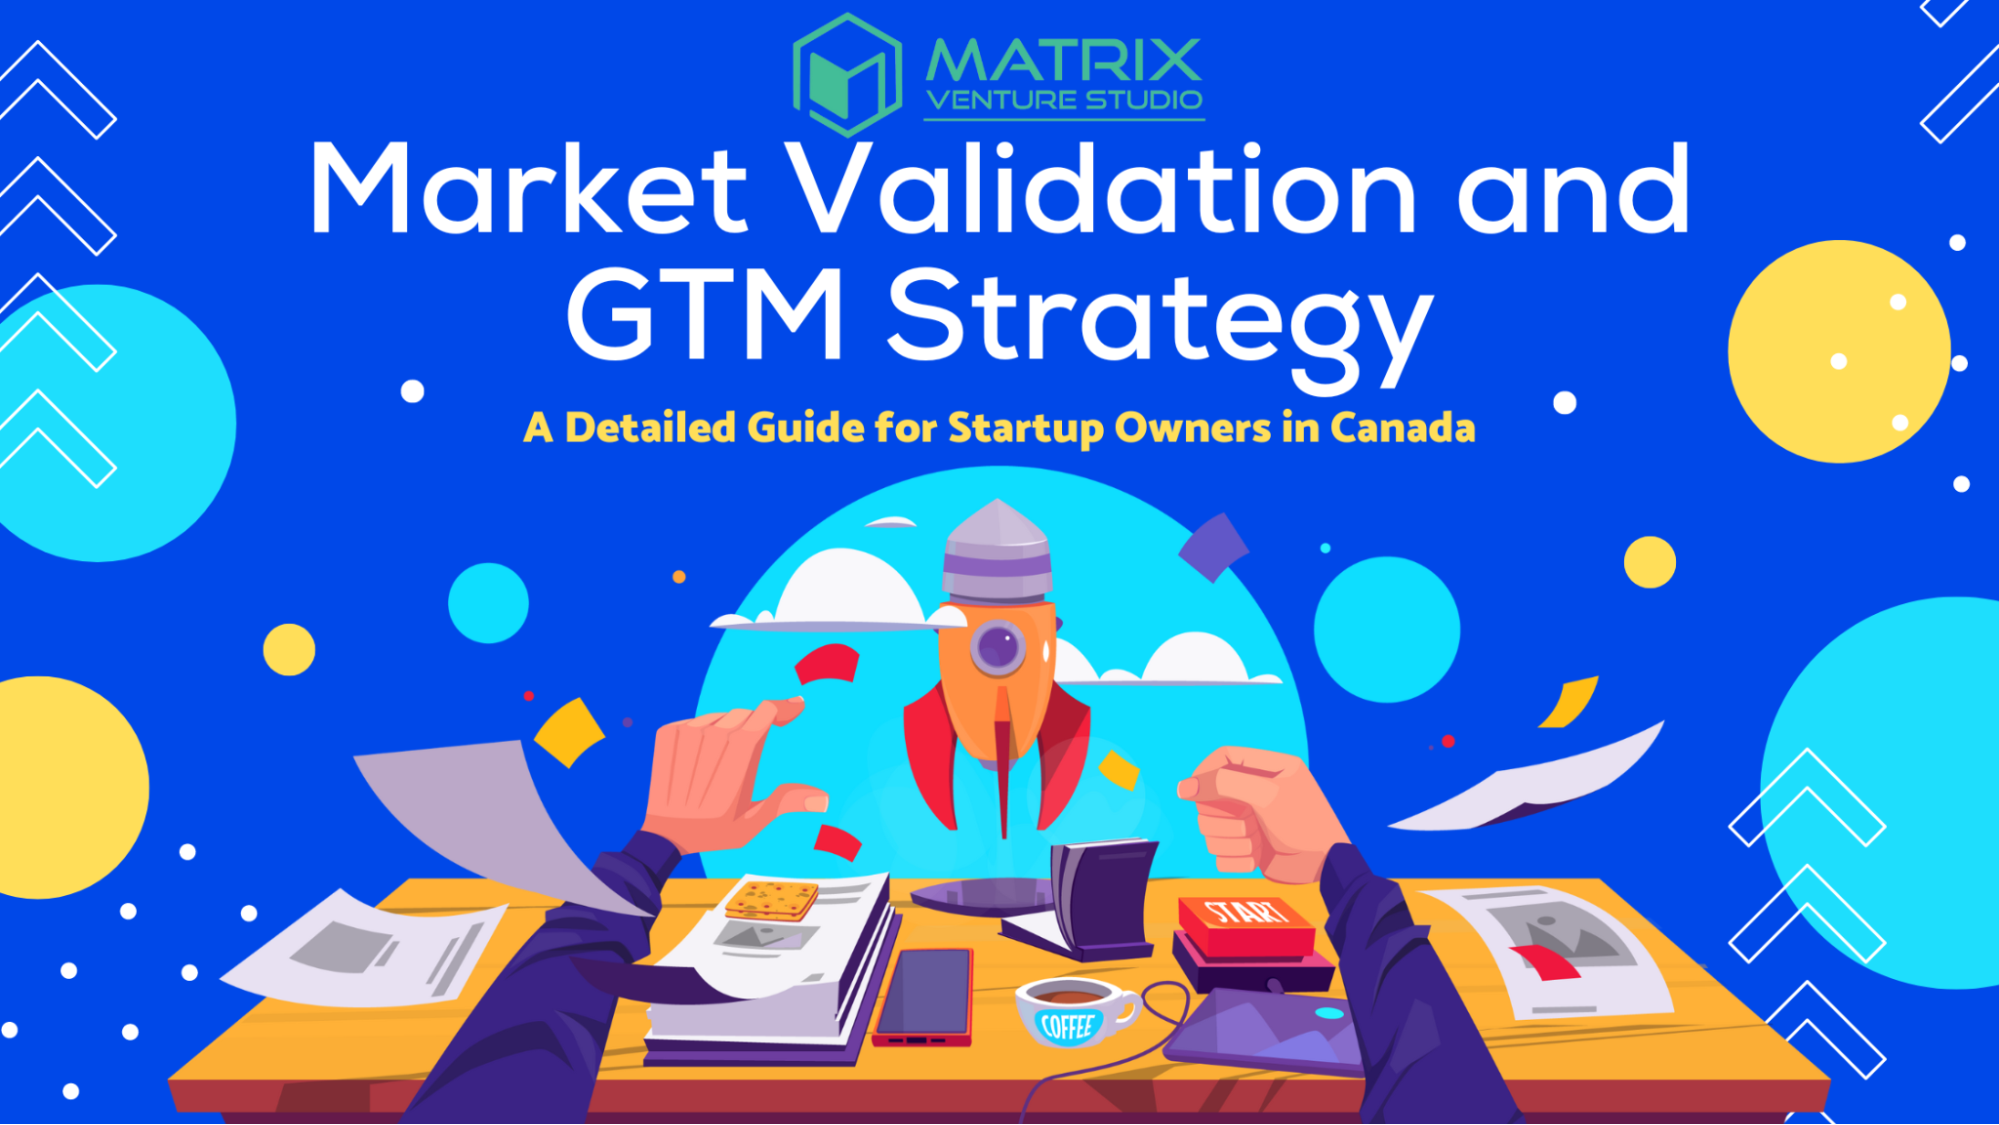 Market Validation and GTM Strategy